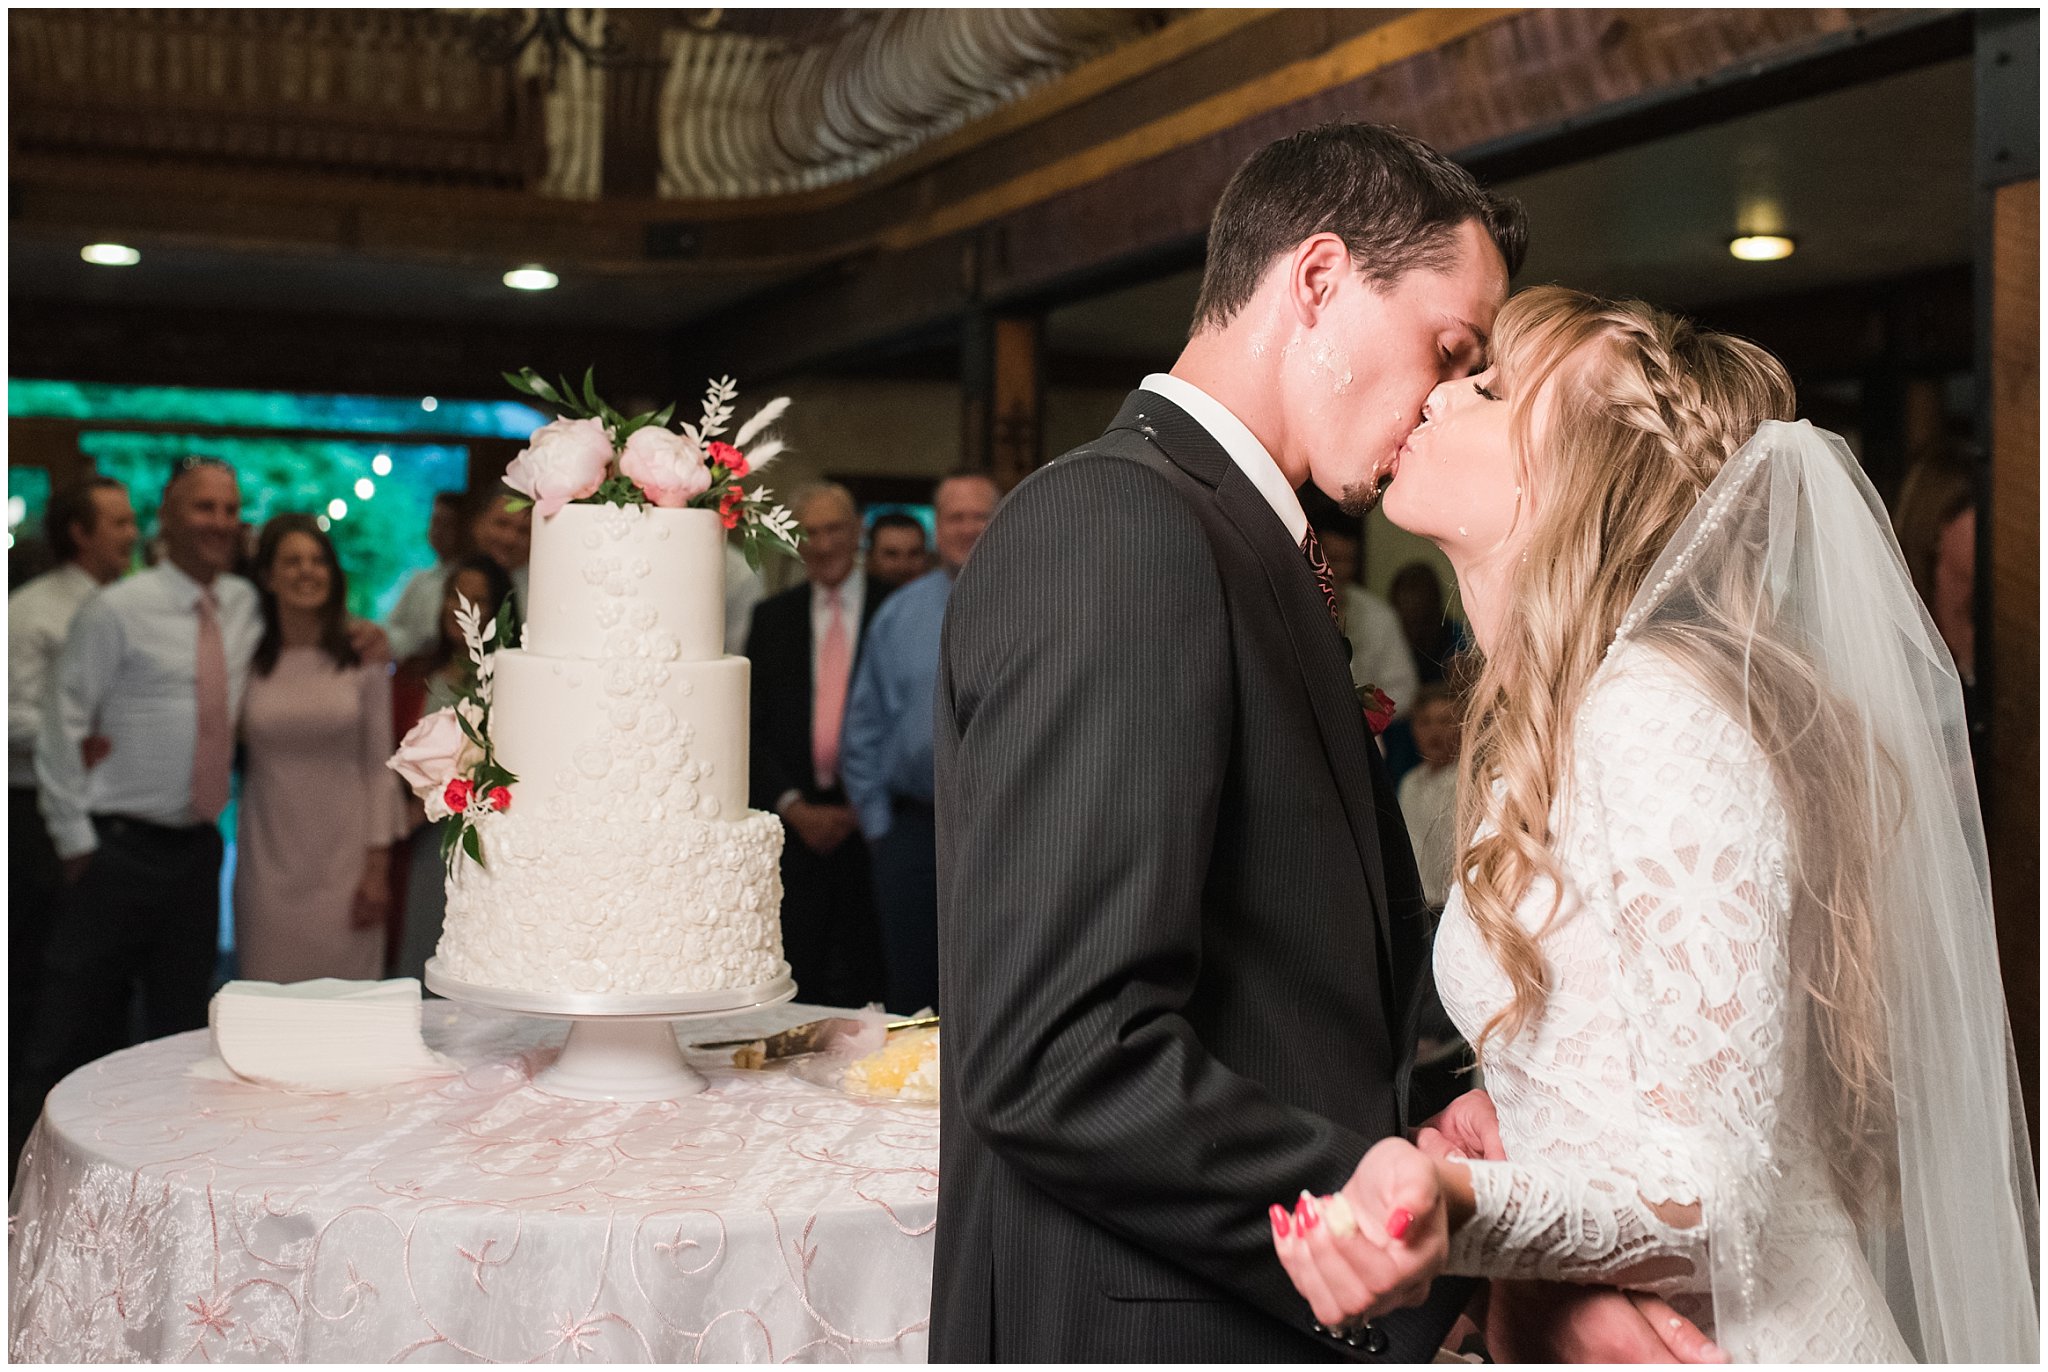 Caking cutting and smashing during reception in the barn | Wadley Farms Summer Wedding | Jessie and Dallin Photography